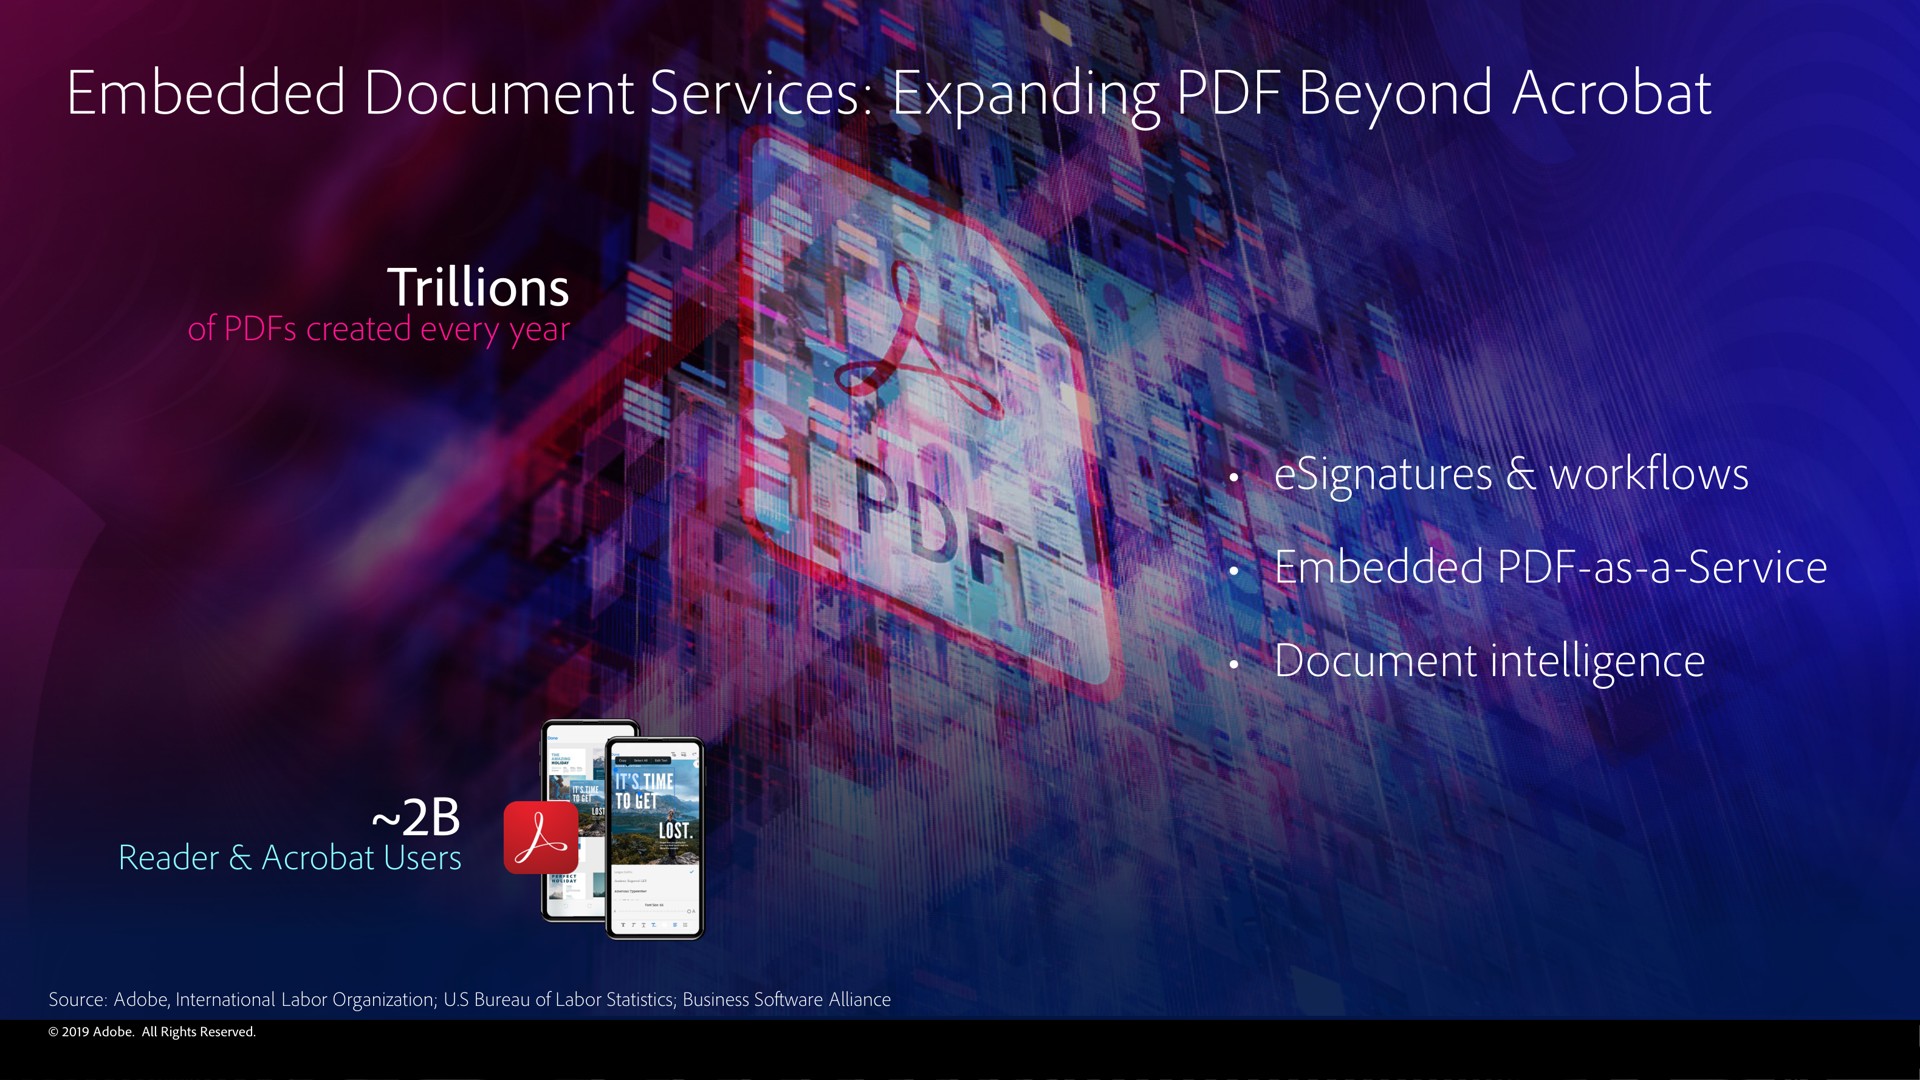 embedded document services expanding beyond acrobat trillions | Adobe